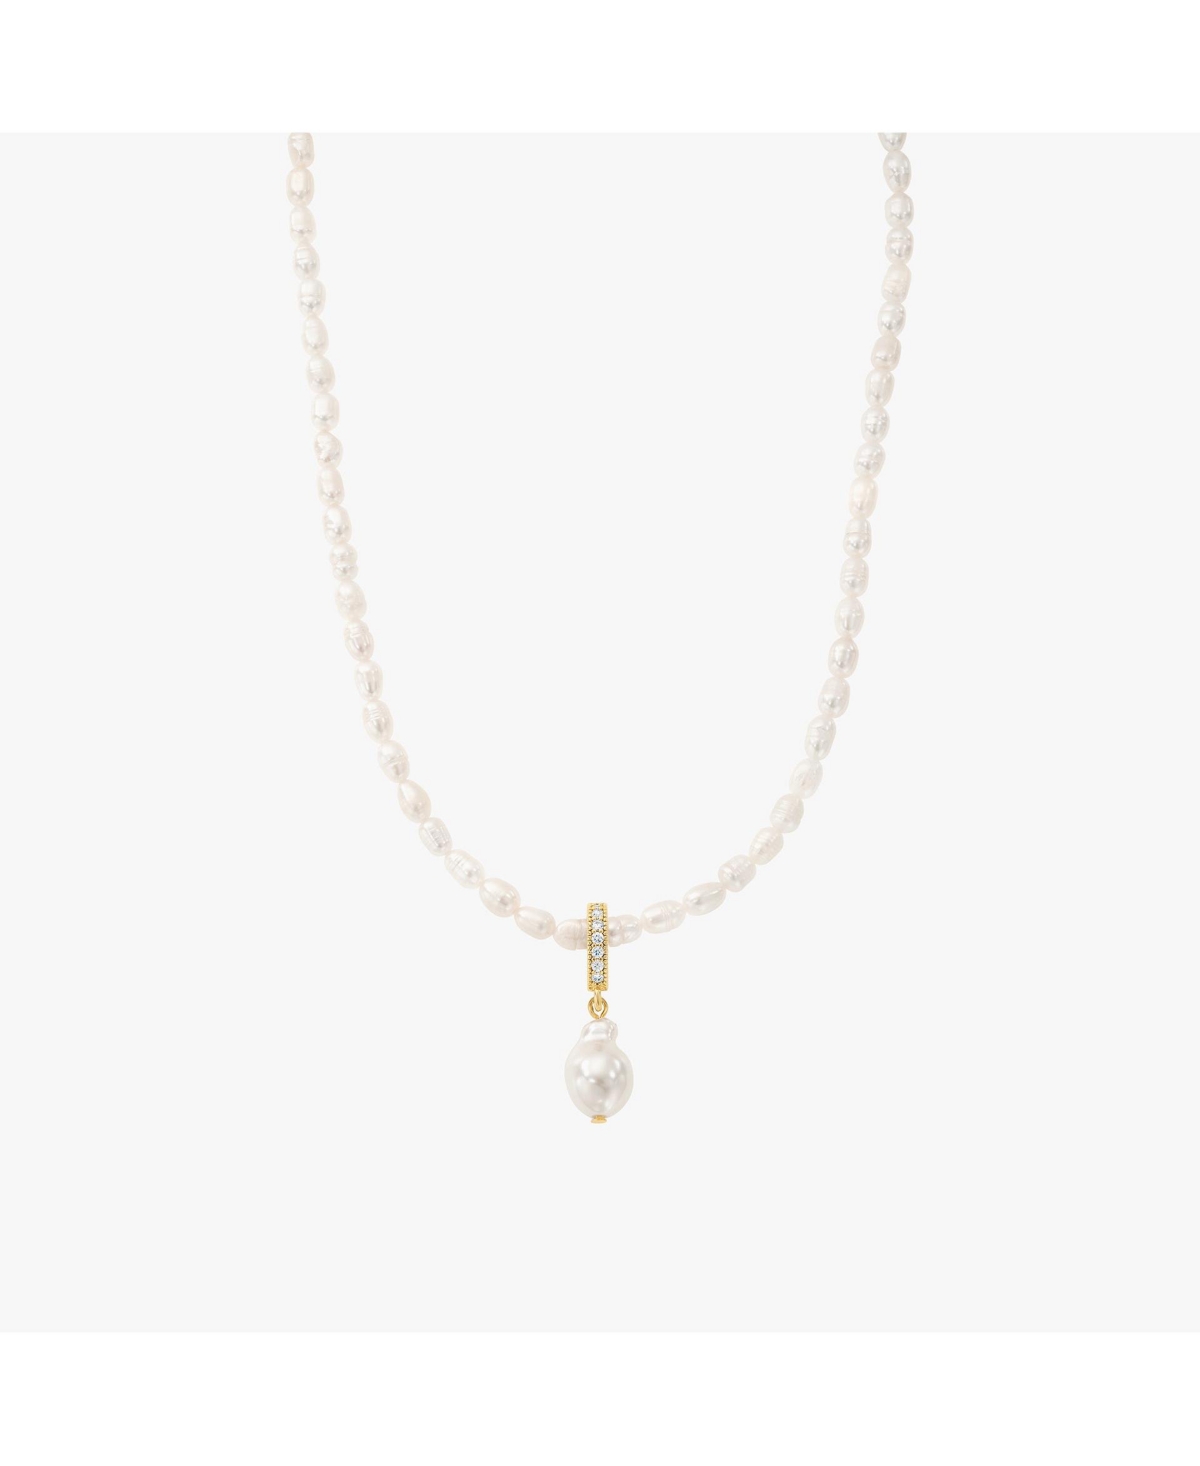 Nacre Cultured Pearl Necklace with Teardrop Shaped Charm Pendant - White